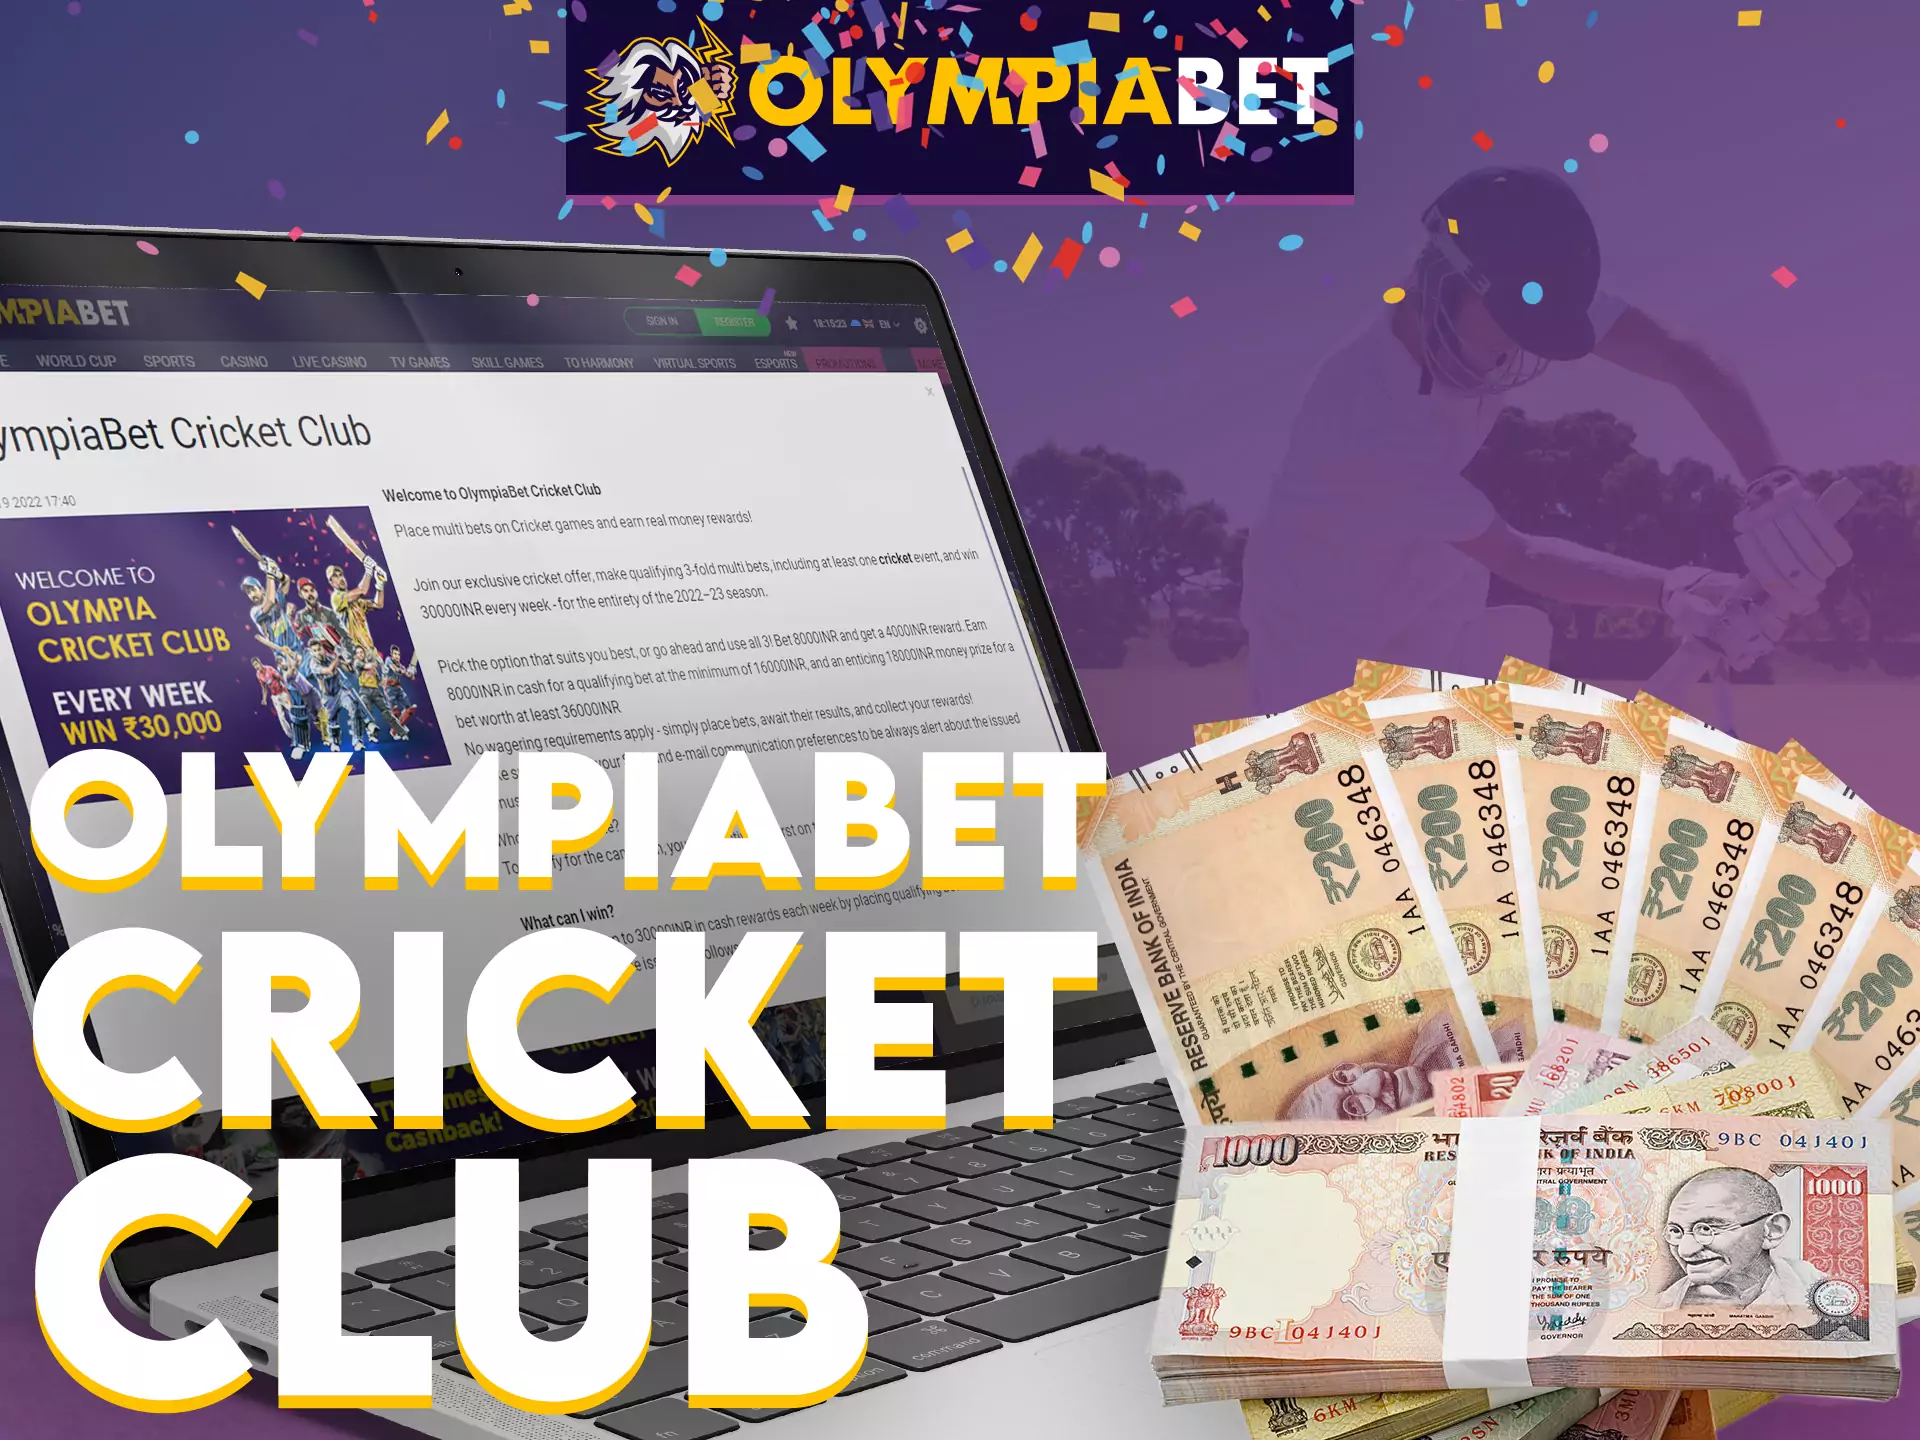 In the OlympiaBet Cricket Club, get a special bonus for your first deposit.